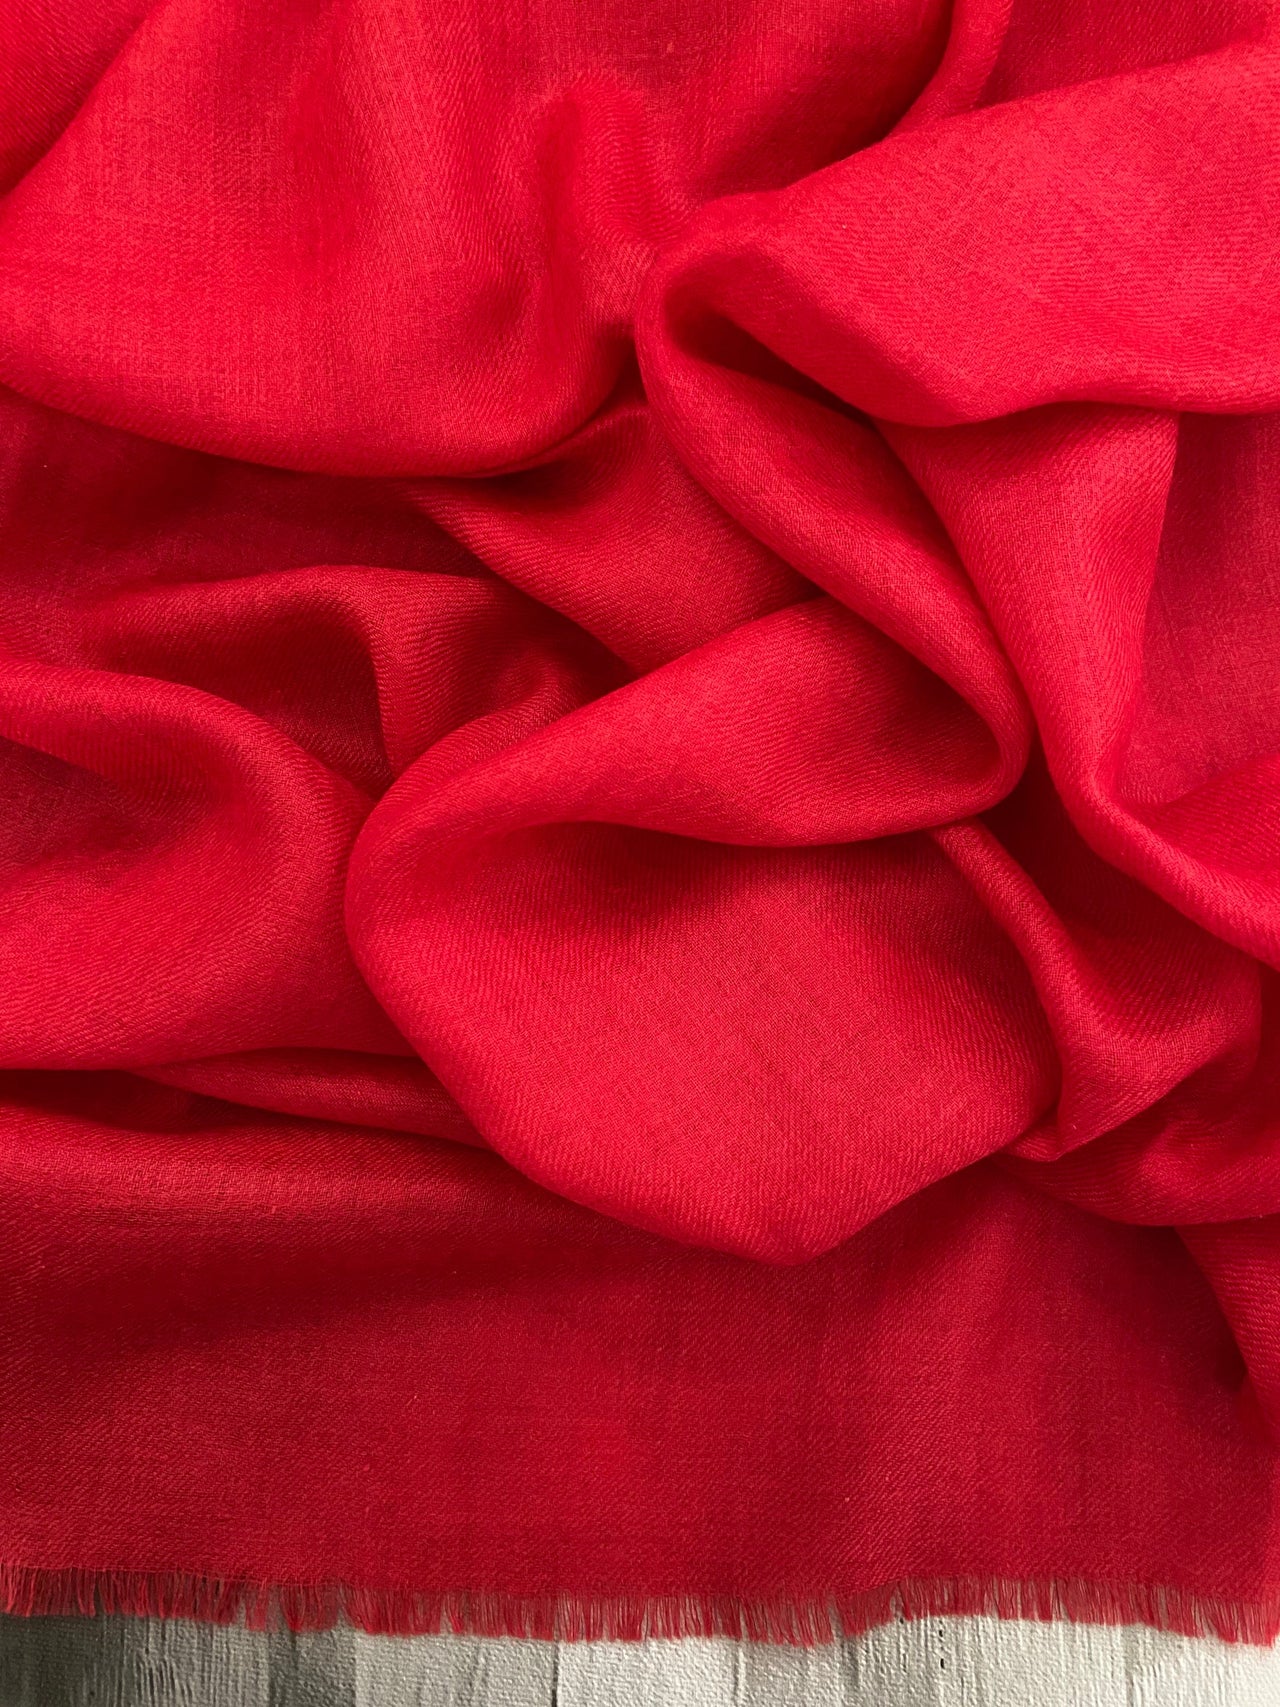 100% Cashmere/Pashmina Scarf/Shawl/Wrap from Kashmir, India | Handwoven | Red | Ships from California